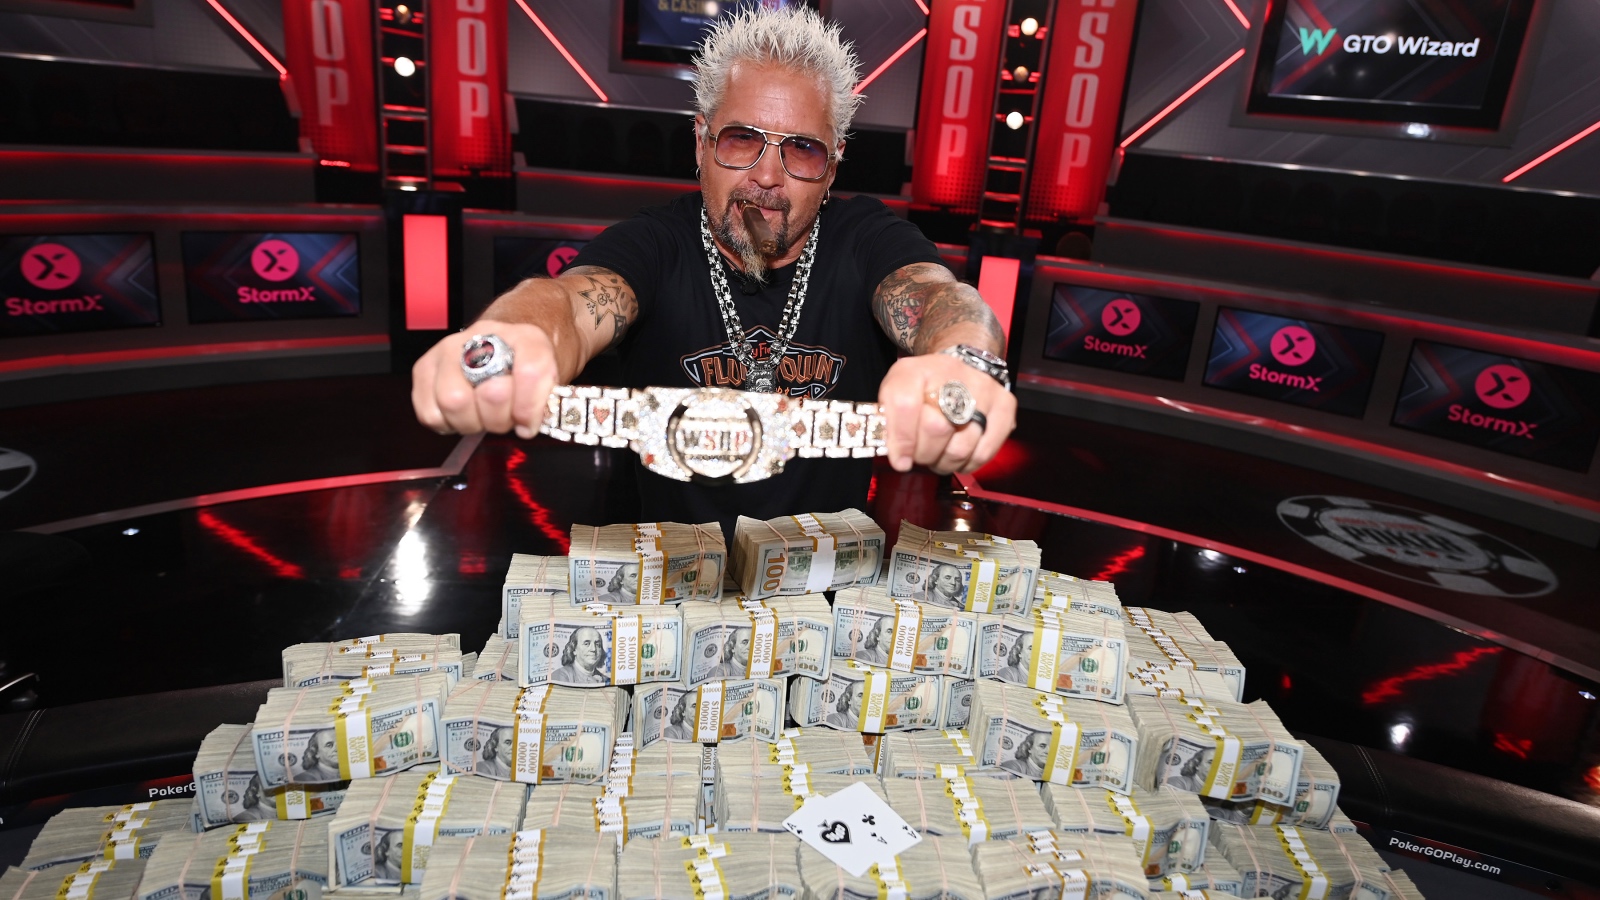 2023 World Series of Poker Main Event bracelet and cash held by Guy Fieri